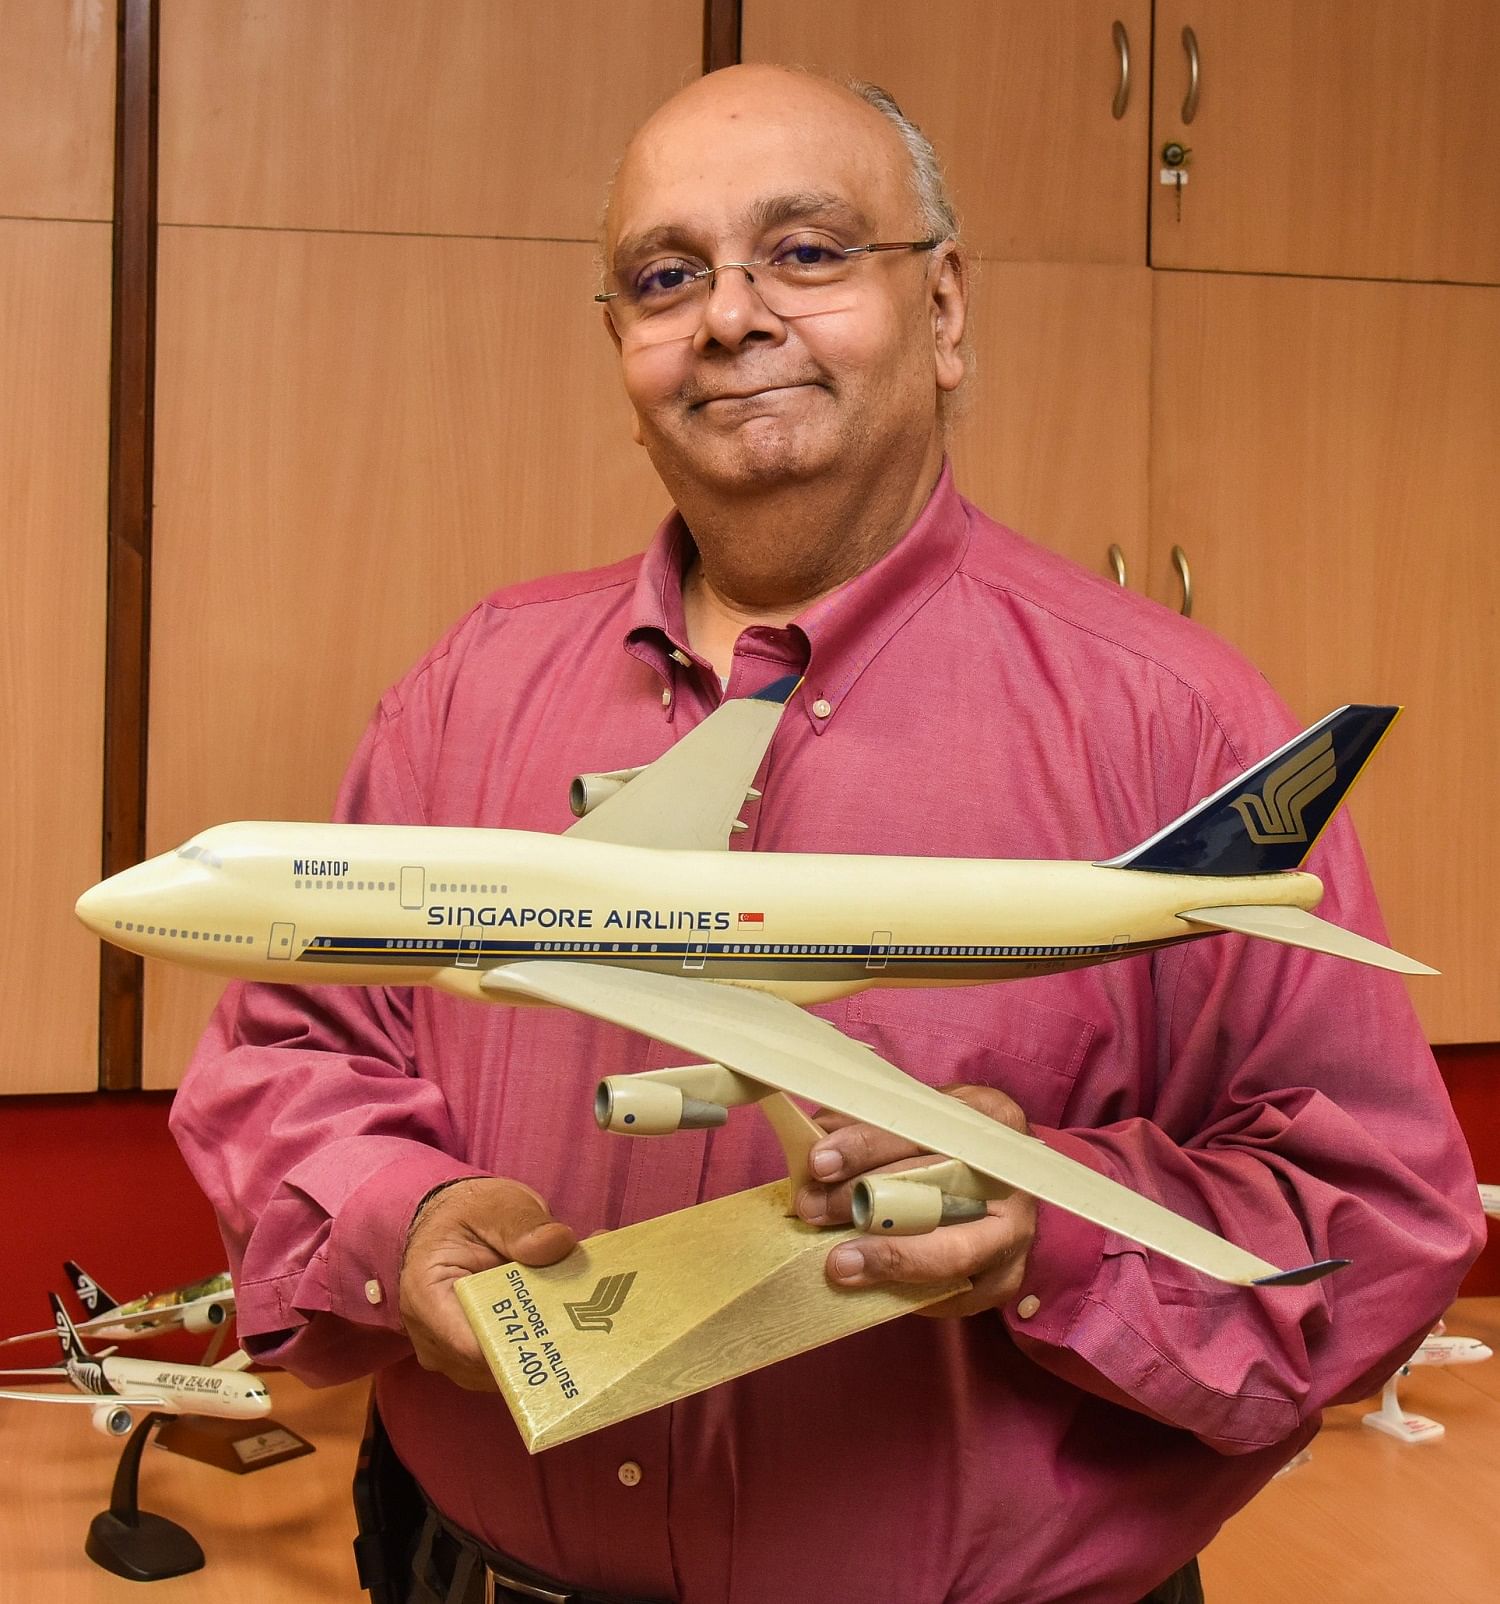 Devesh Agarwal has a collection of around 100 airplane models.  